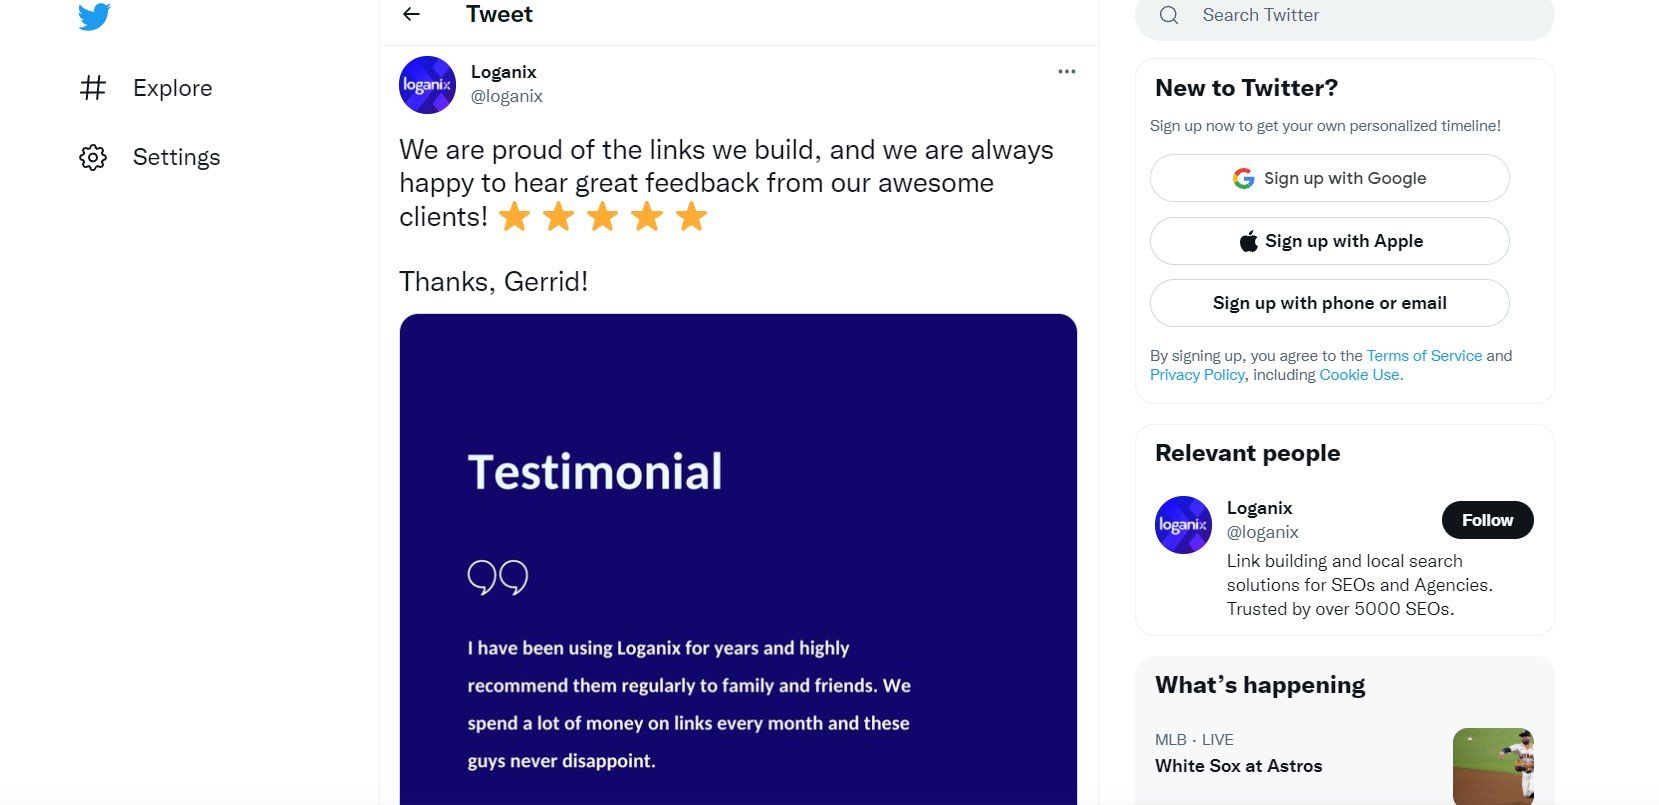 Tweet by @Loganix sharing a positive review